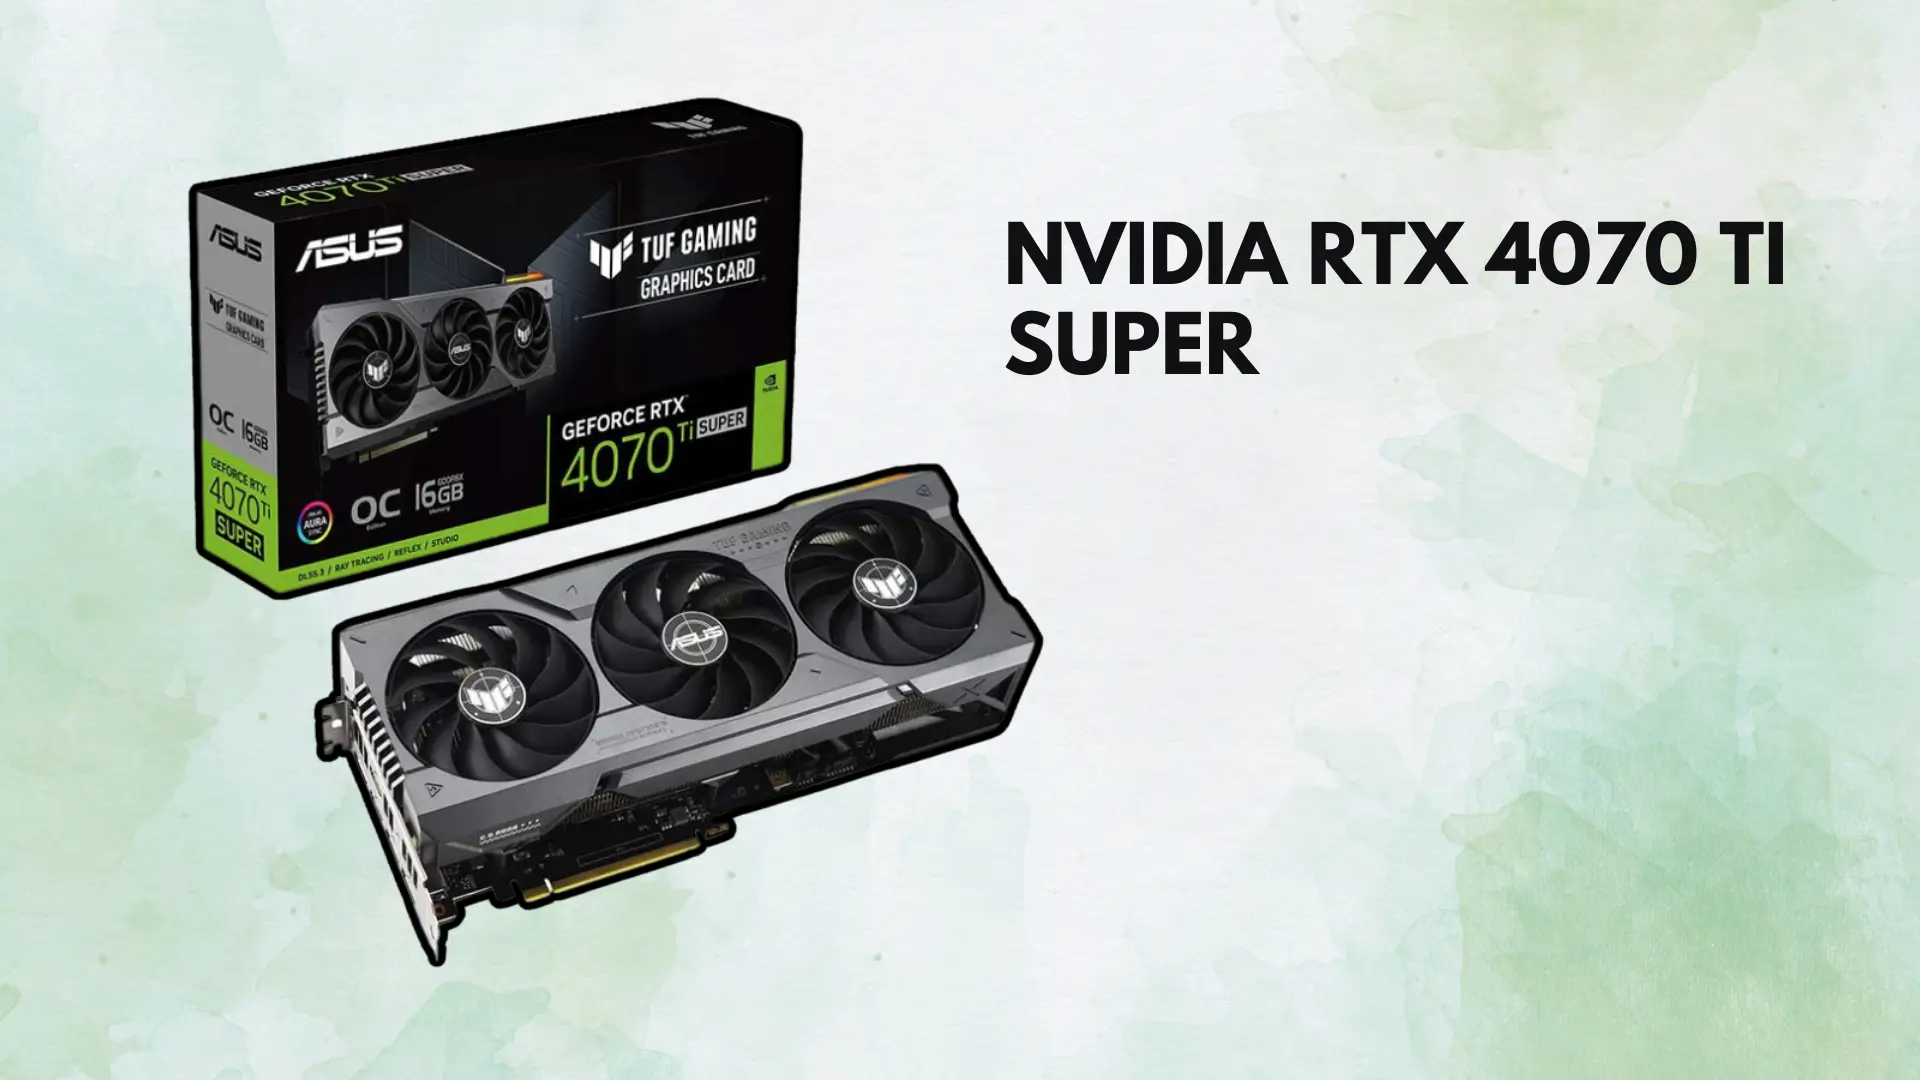 RTX 4070 Ti Super Performance and Value: It’s Boring and Useless